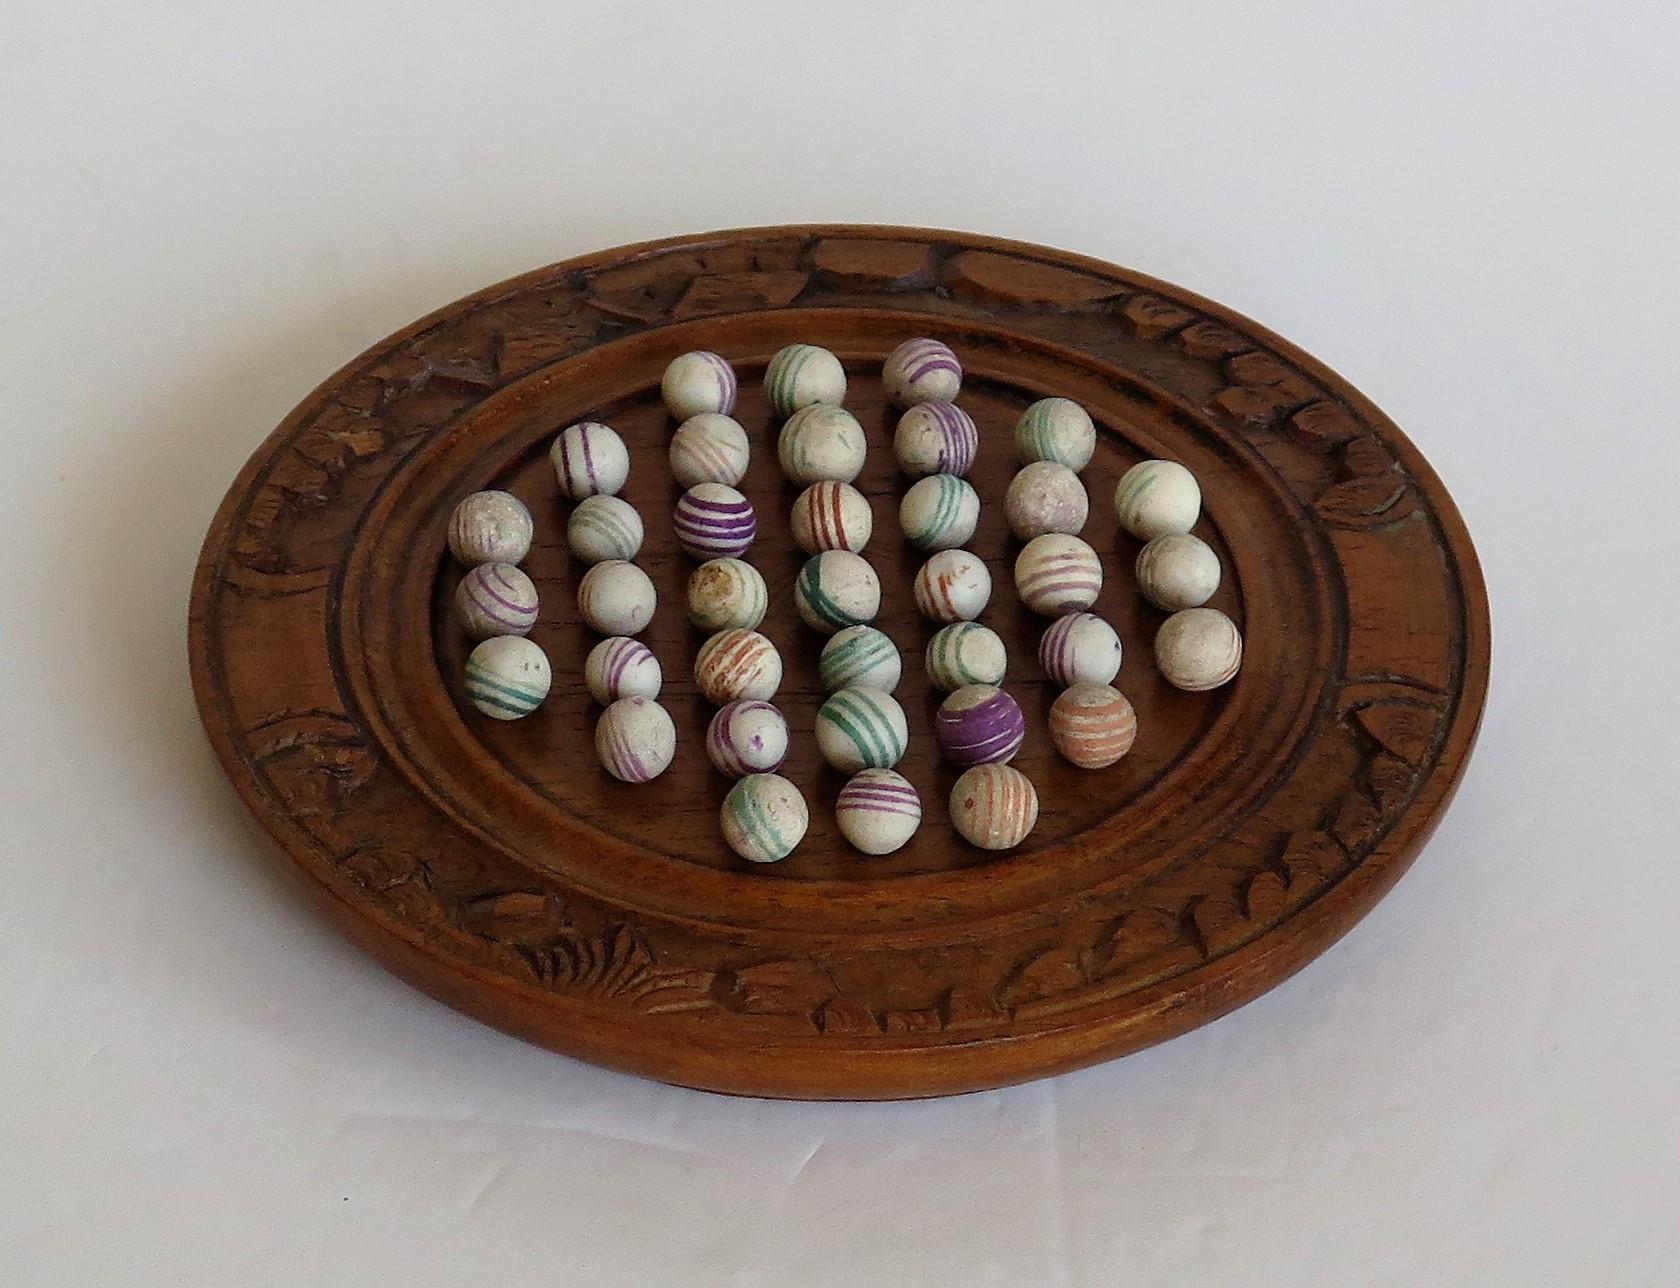 Victorian Marble Solitaire Board Game with 37 Early Handmade Ceramic Marbles, circa 1870